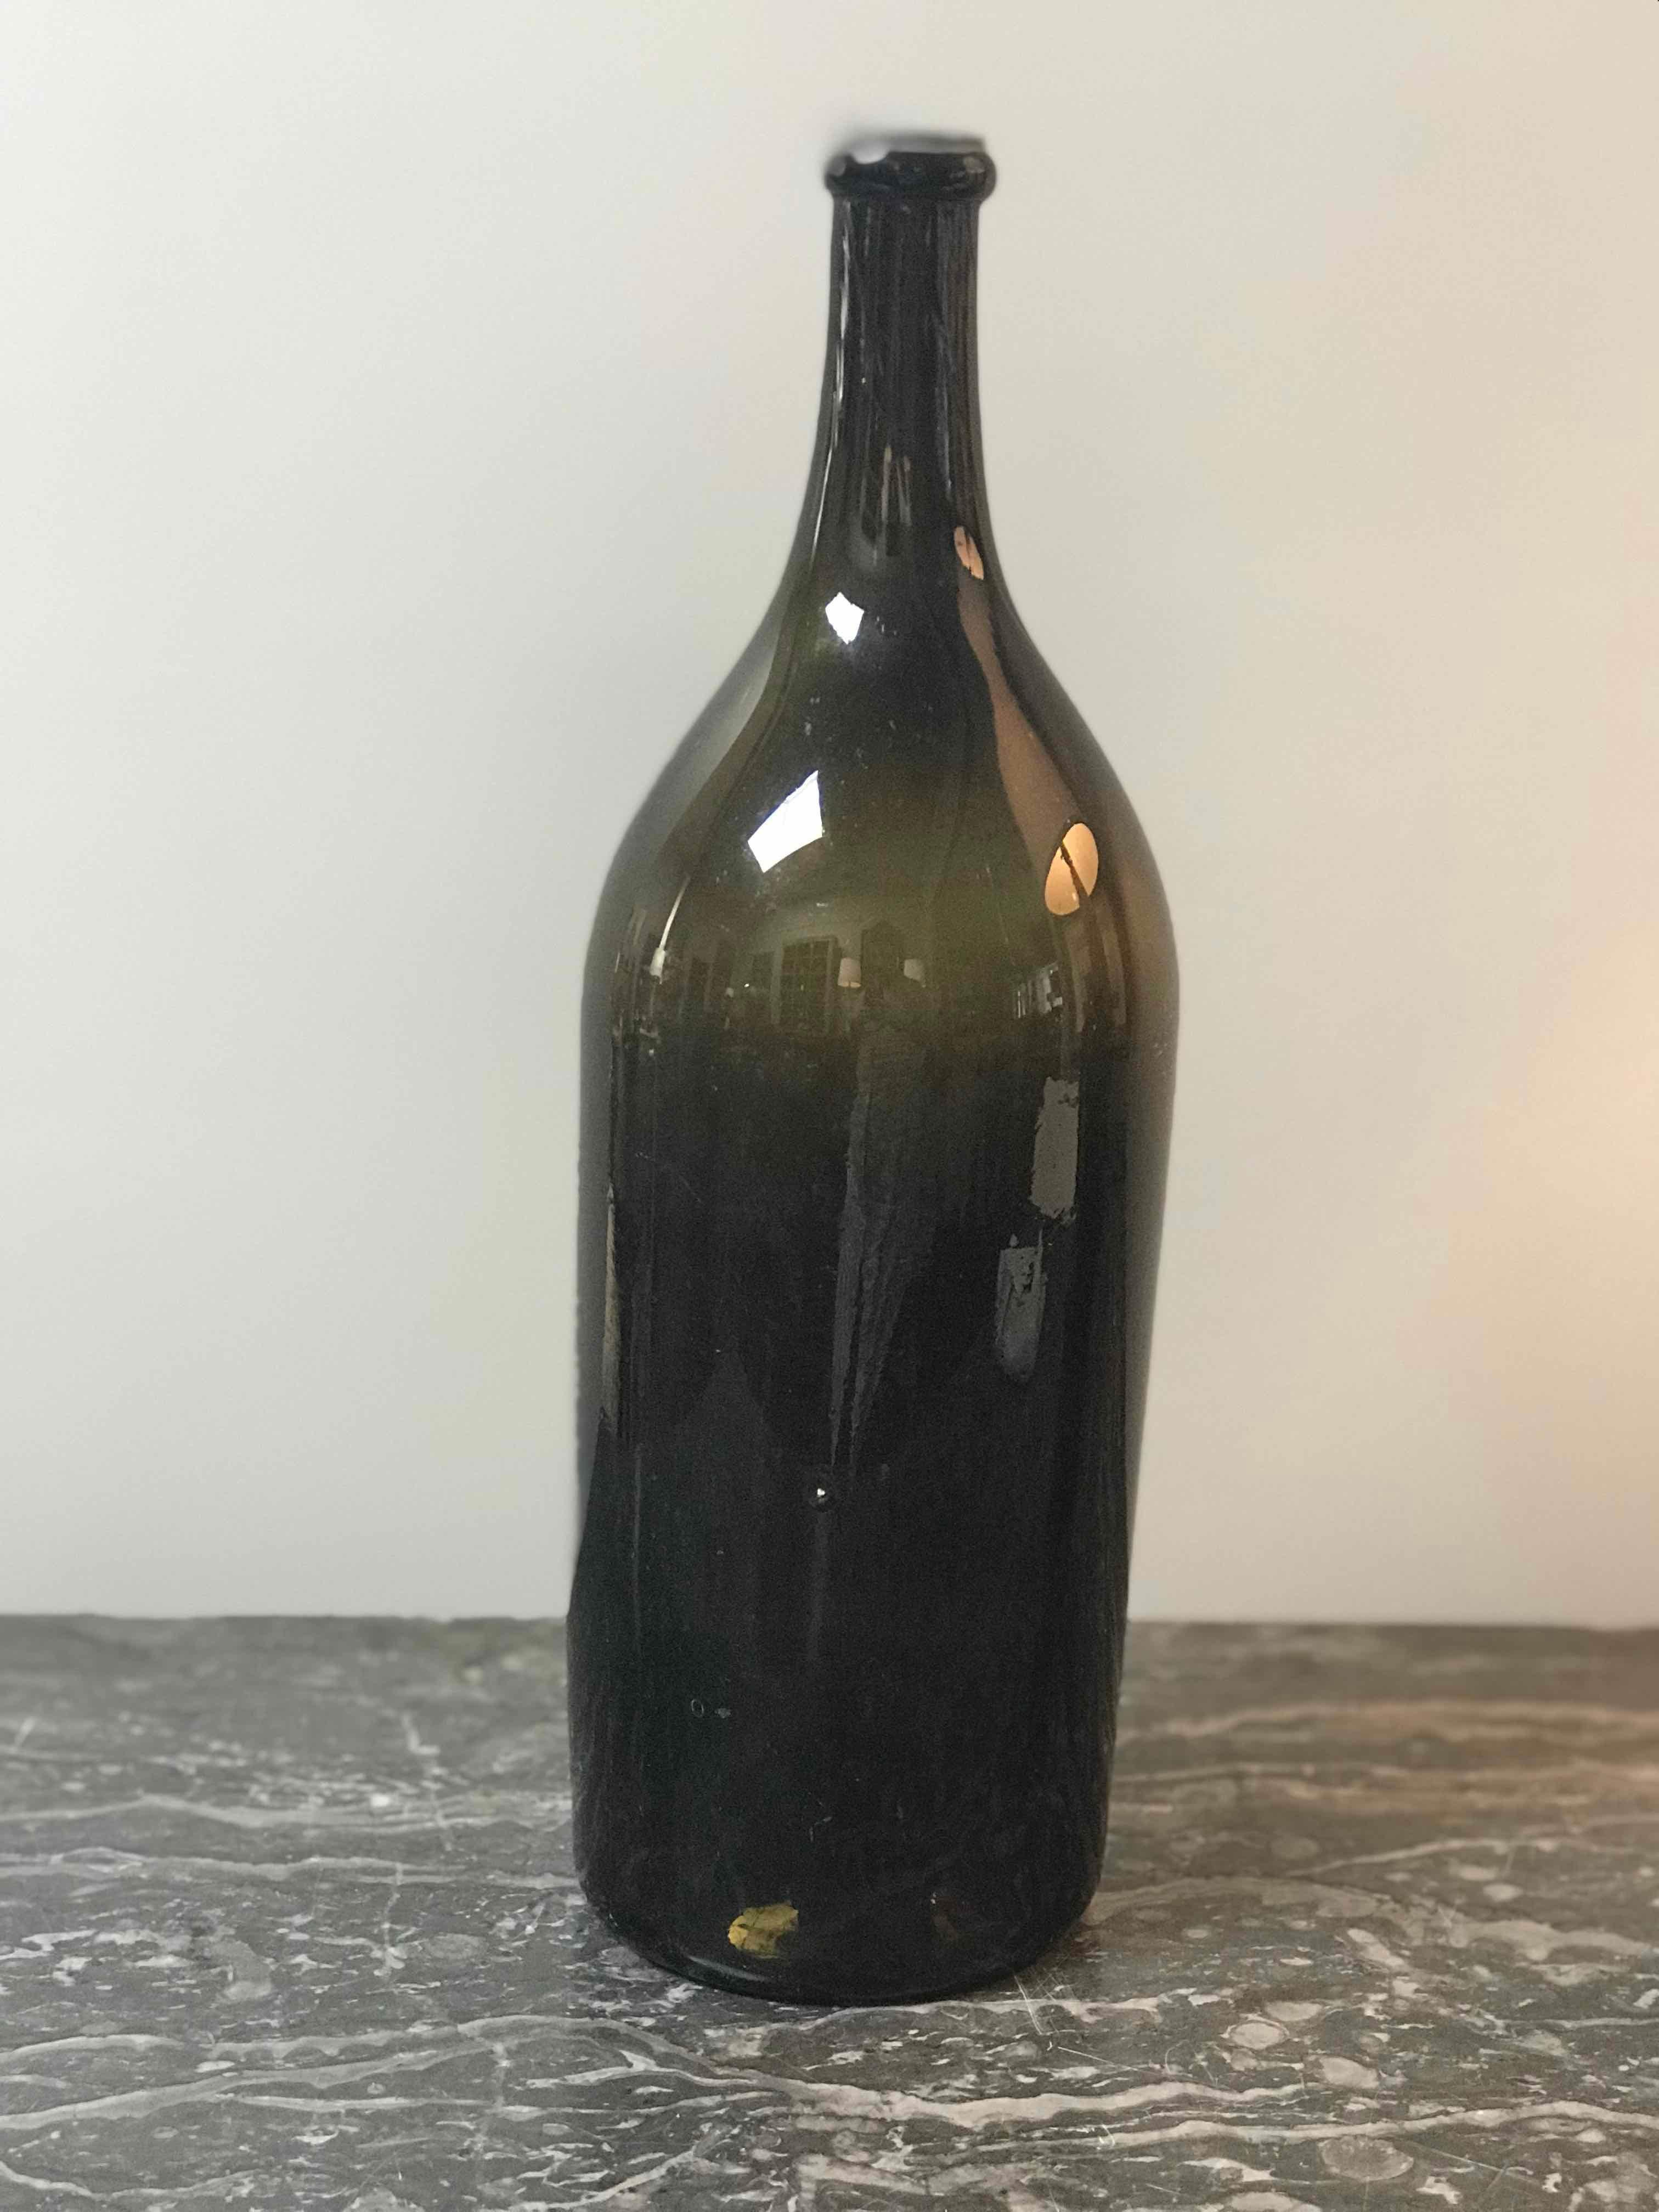 French 19th-century hand-blown glass bottle in beautiful deep olive hue. Rustic and artisanal, this versatile object can be used any number of ways—as a decanter, as a vase, or clustered with other bottles to add height, dimension, and a rich